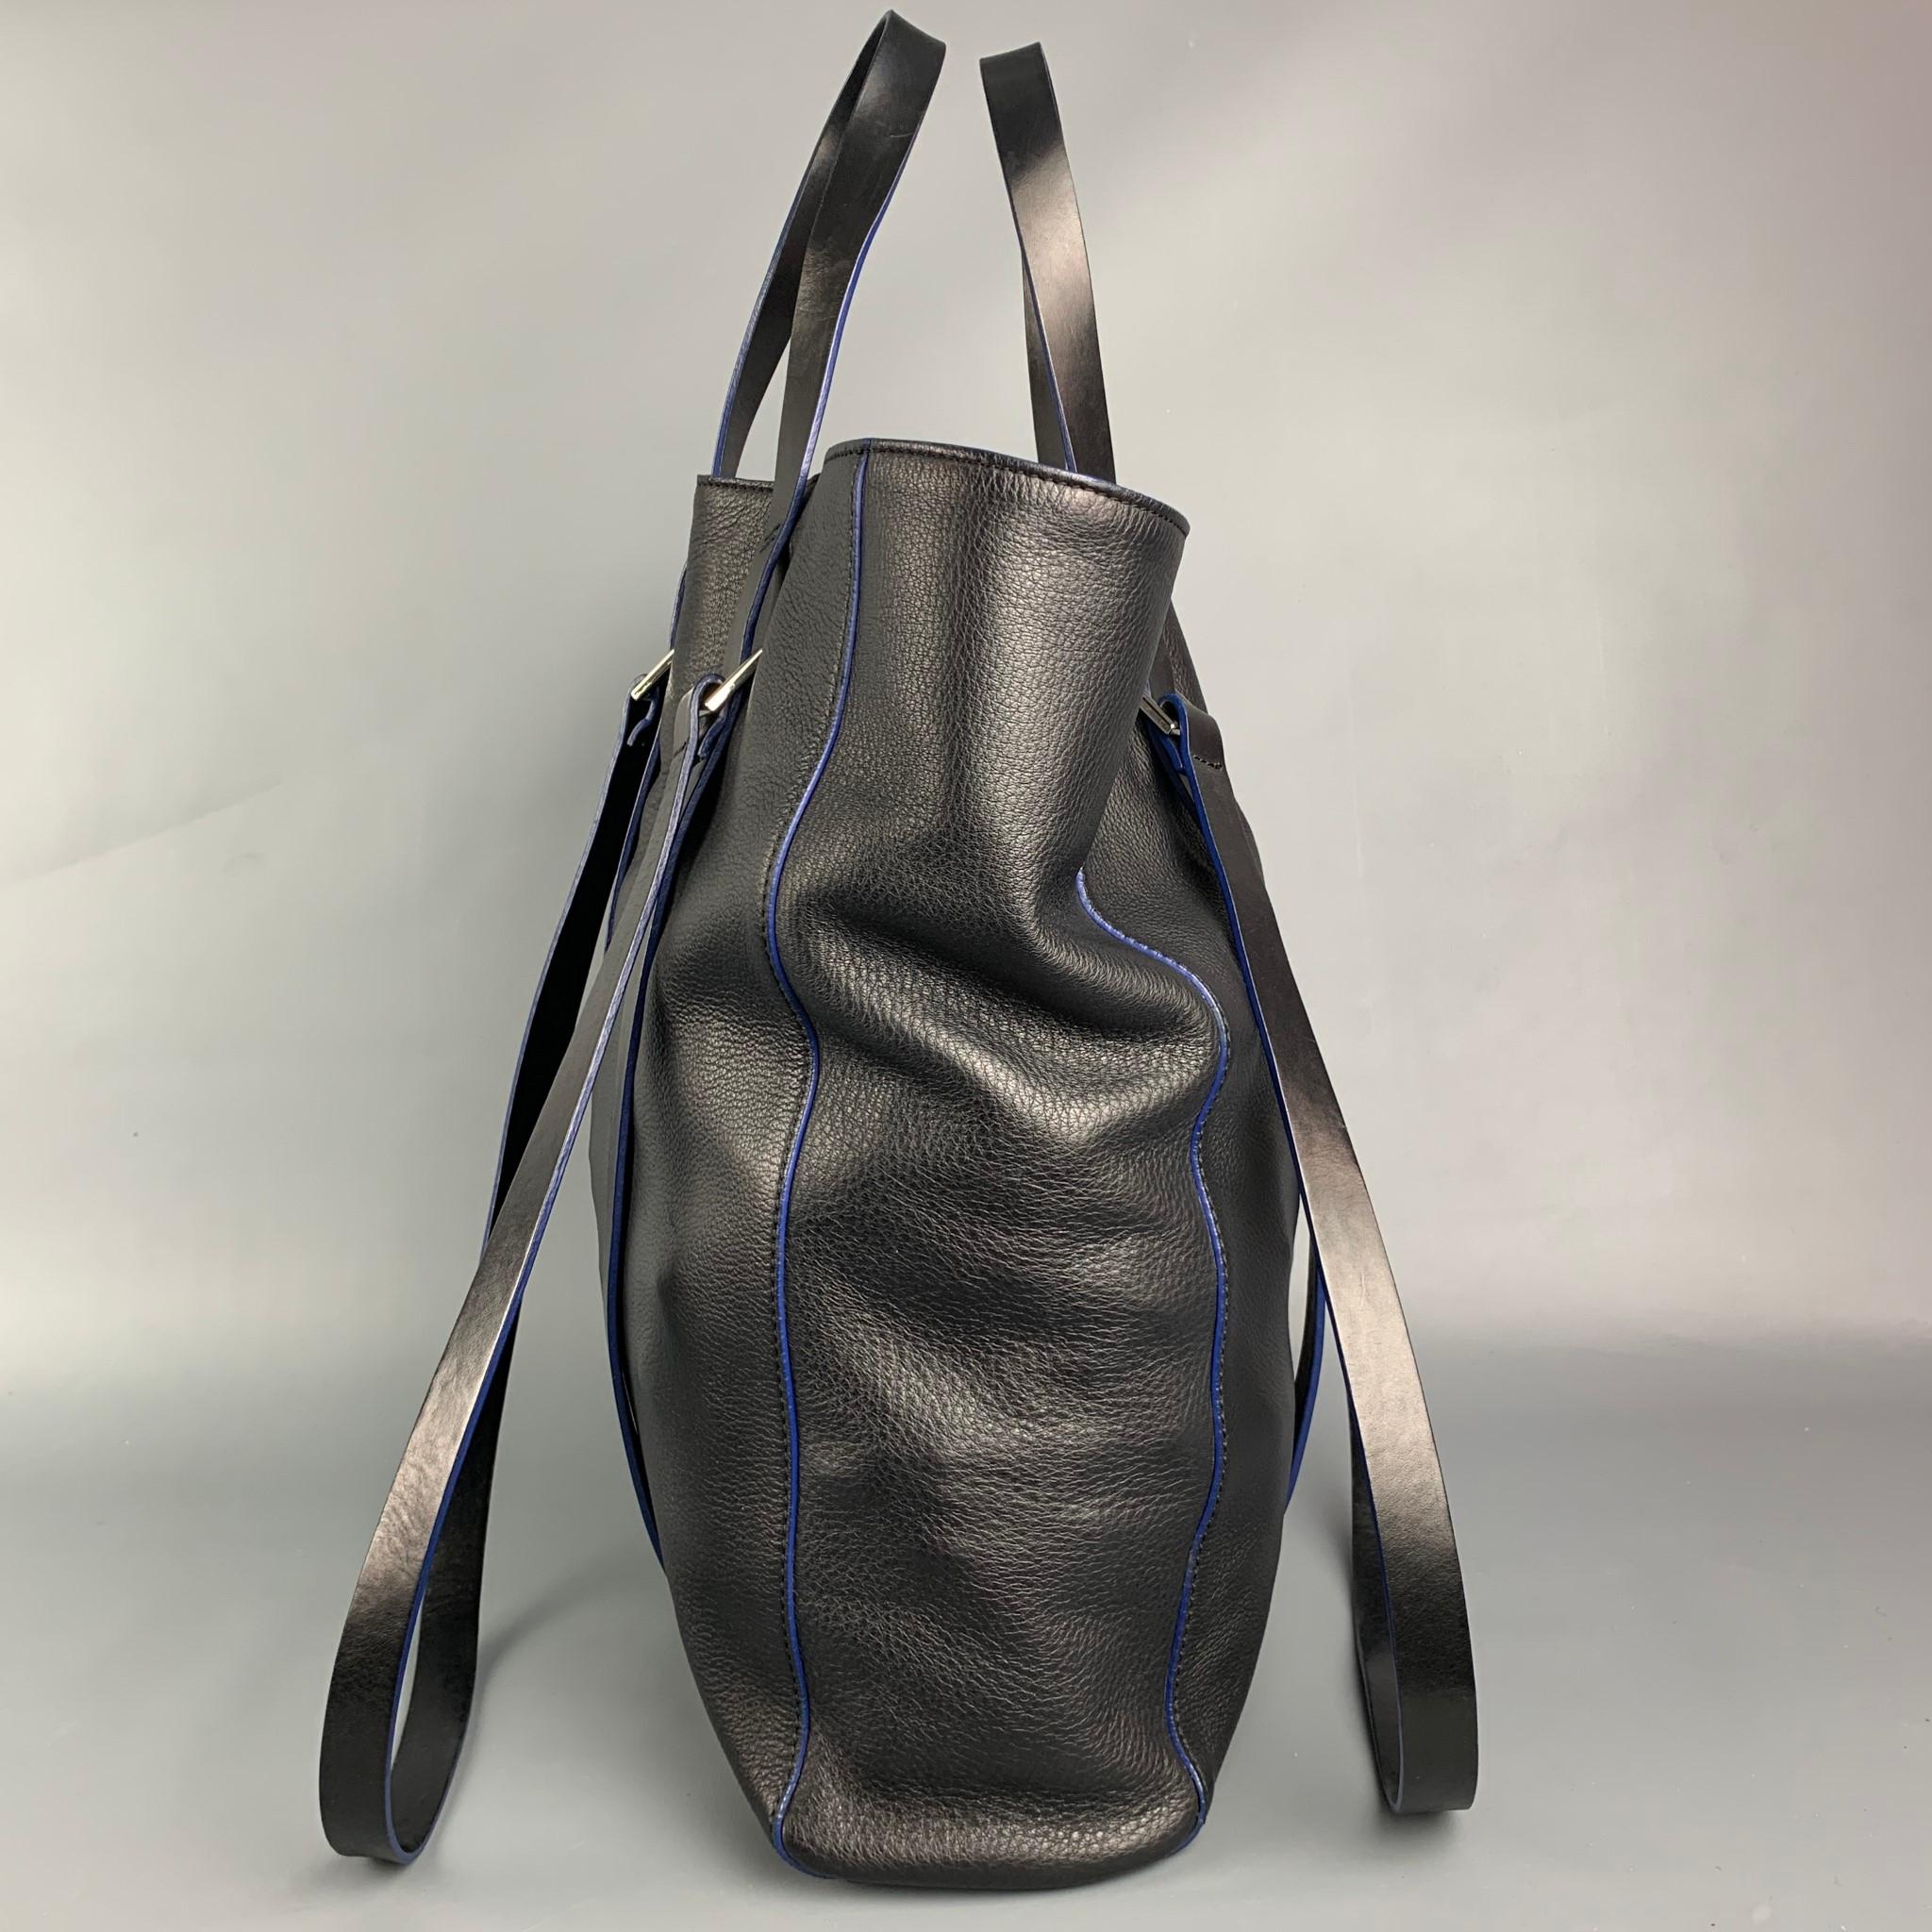 CoSTUME NATIONAL tote bag comes in a black pebble grain leather featuring top handles, shoulder straps, silver tone hardware, blue trim, and a seperate computer bag. 

Very Good Pre-Owned Condition.
Original Retail Price: